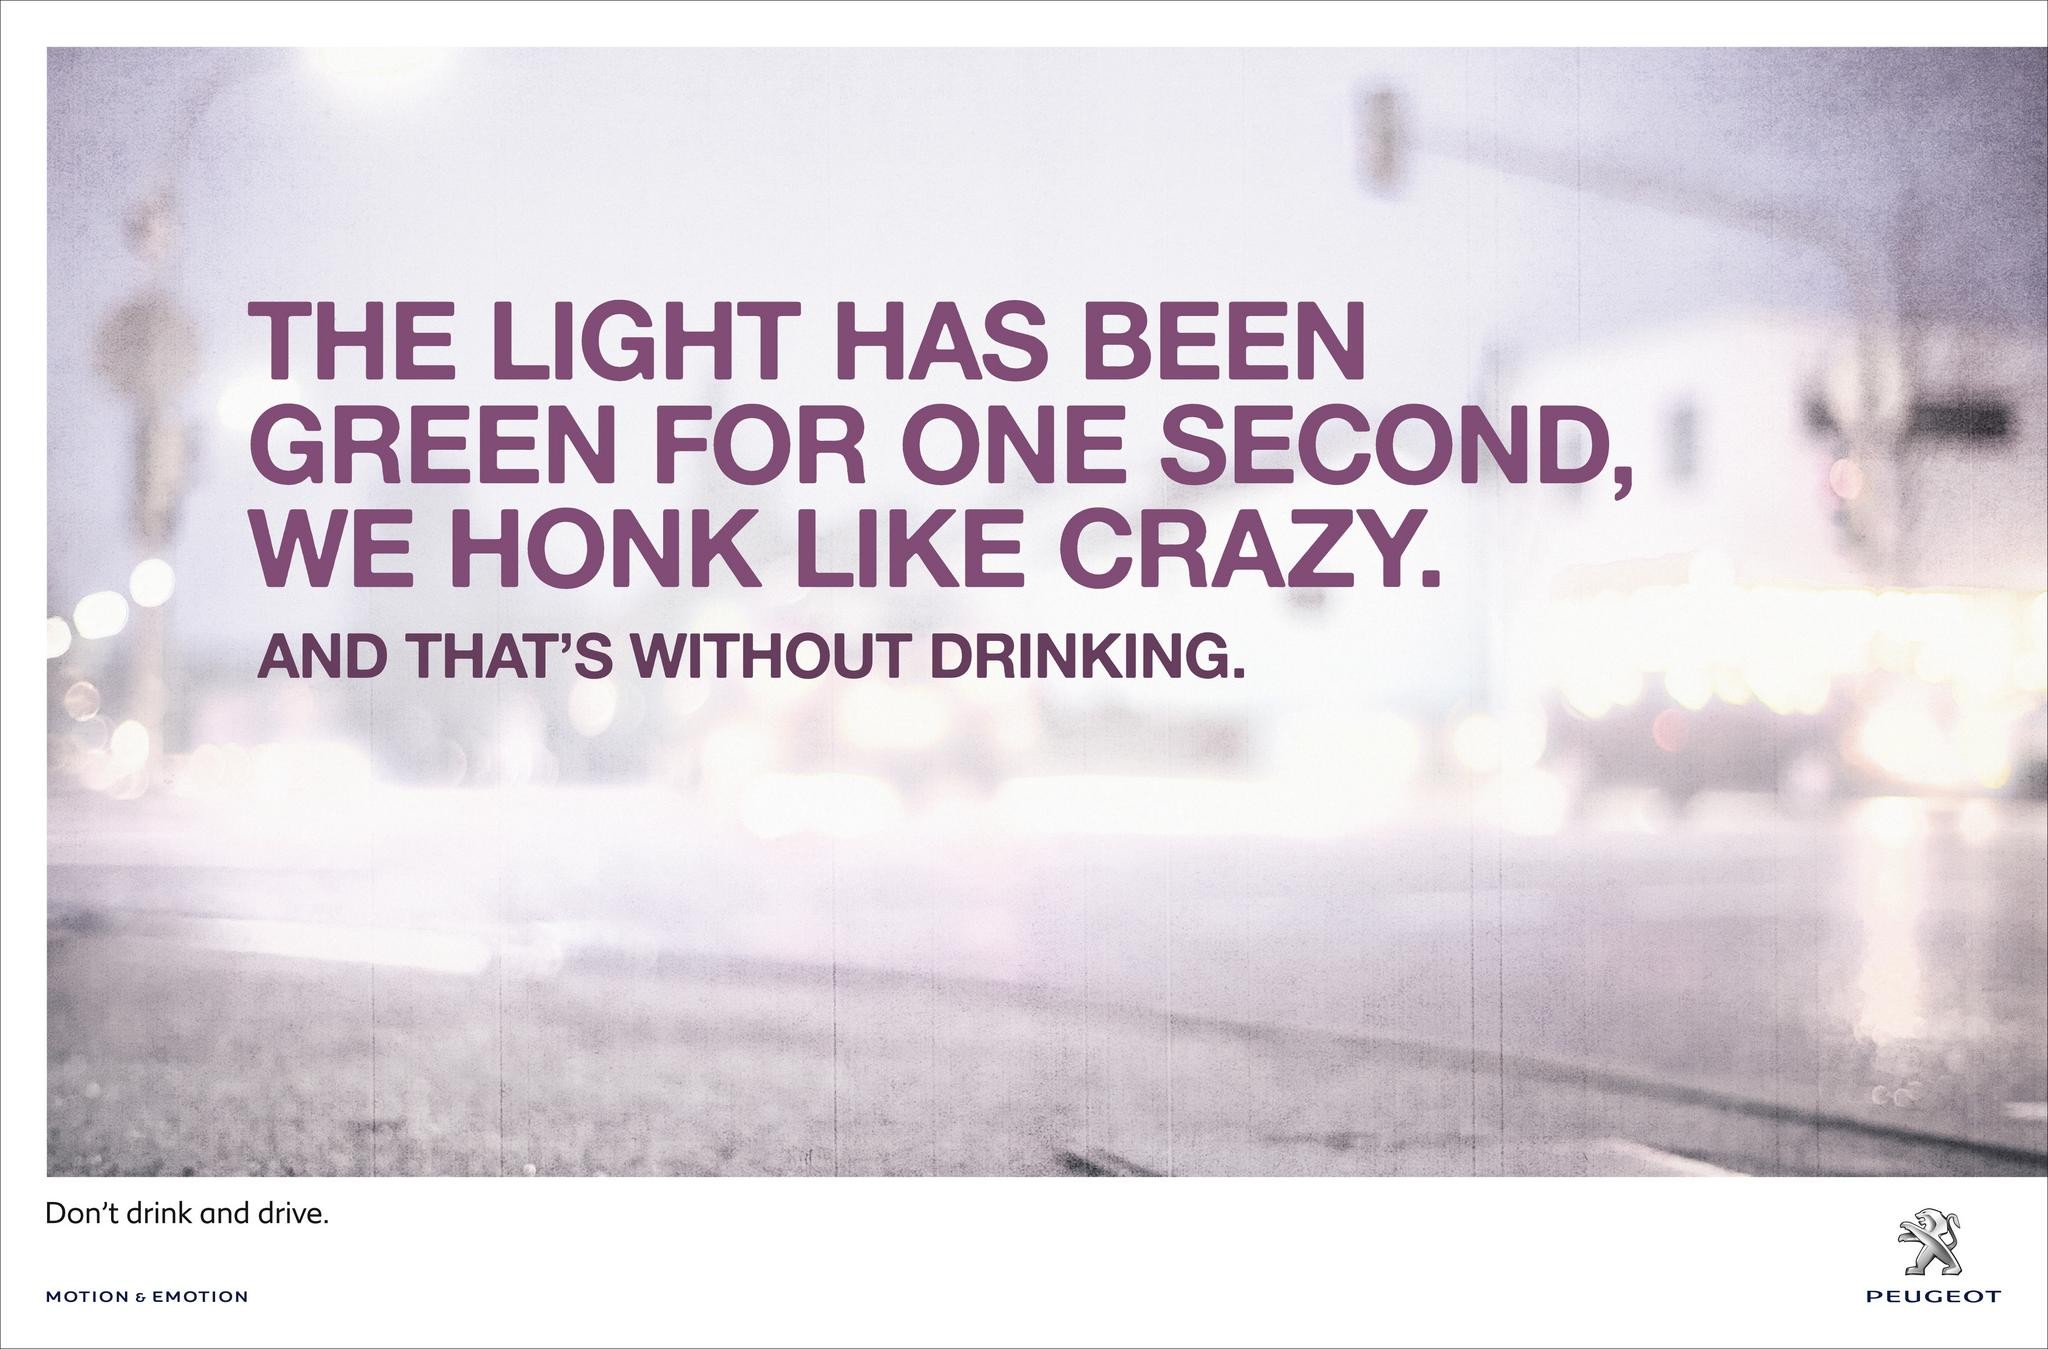 DON`T DRINK AND DRIVE CAMPAIGN